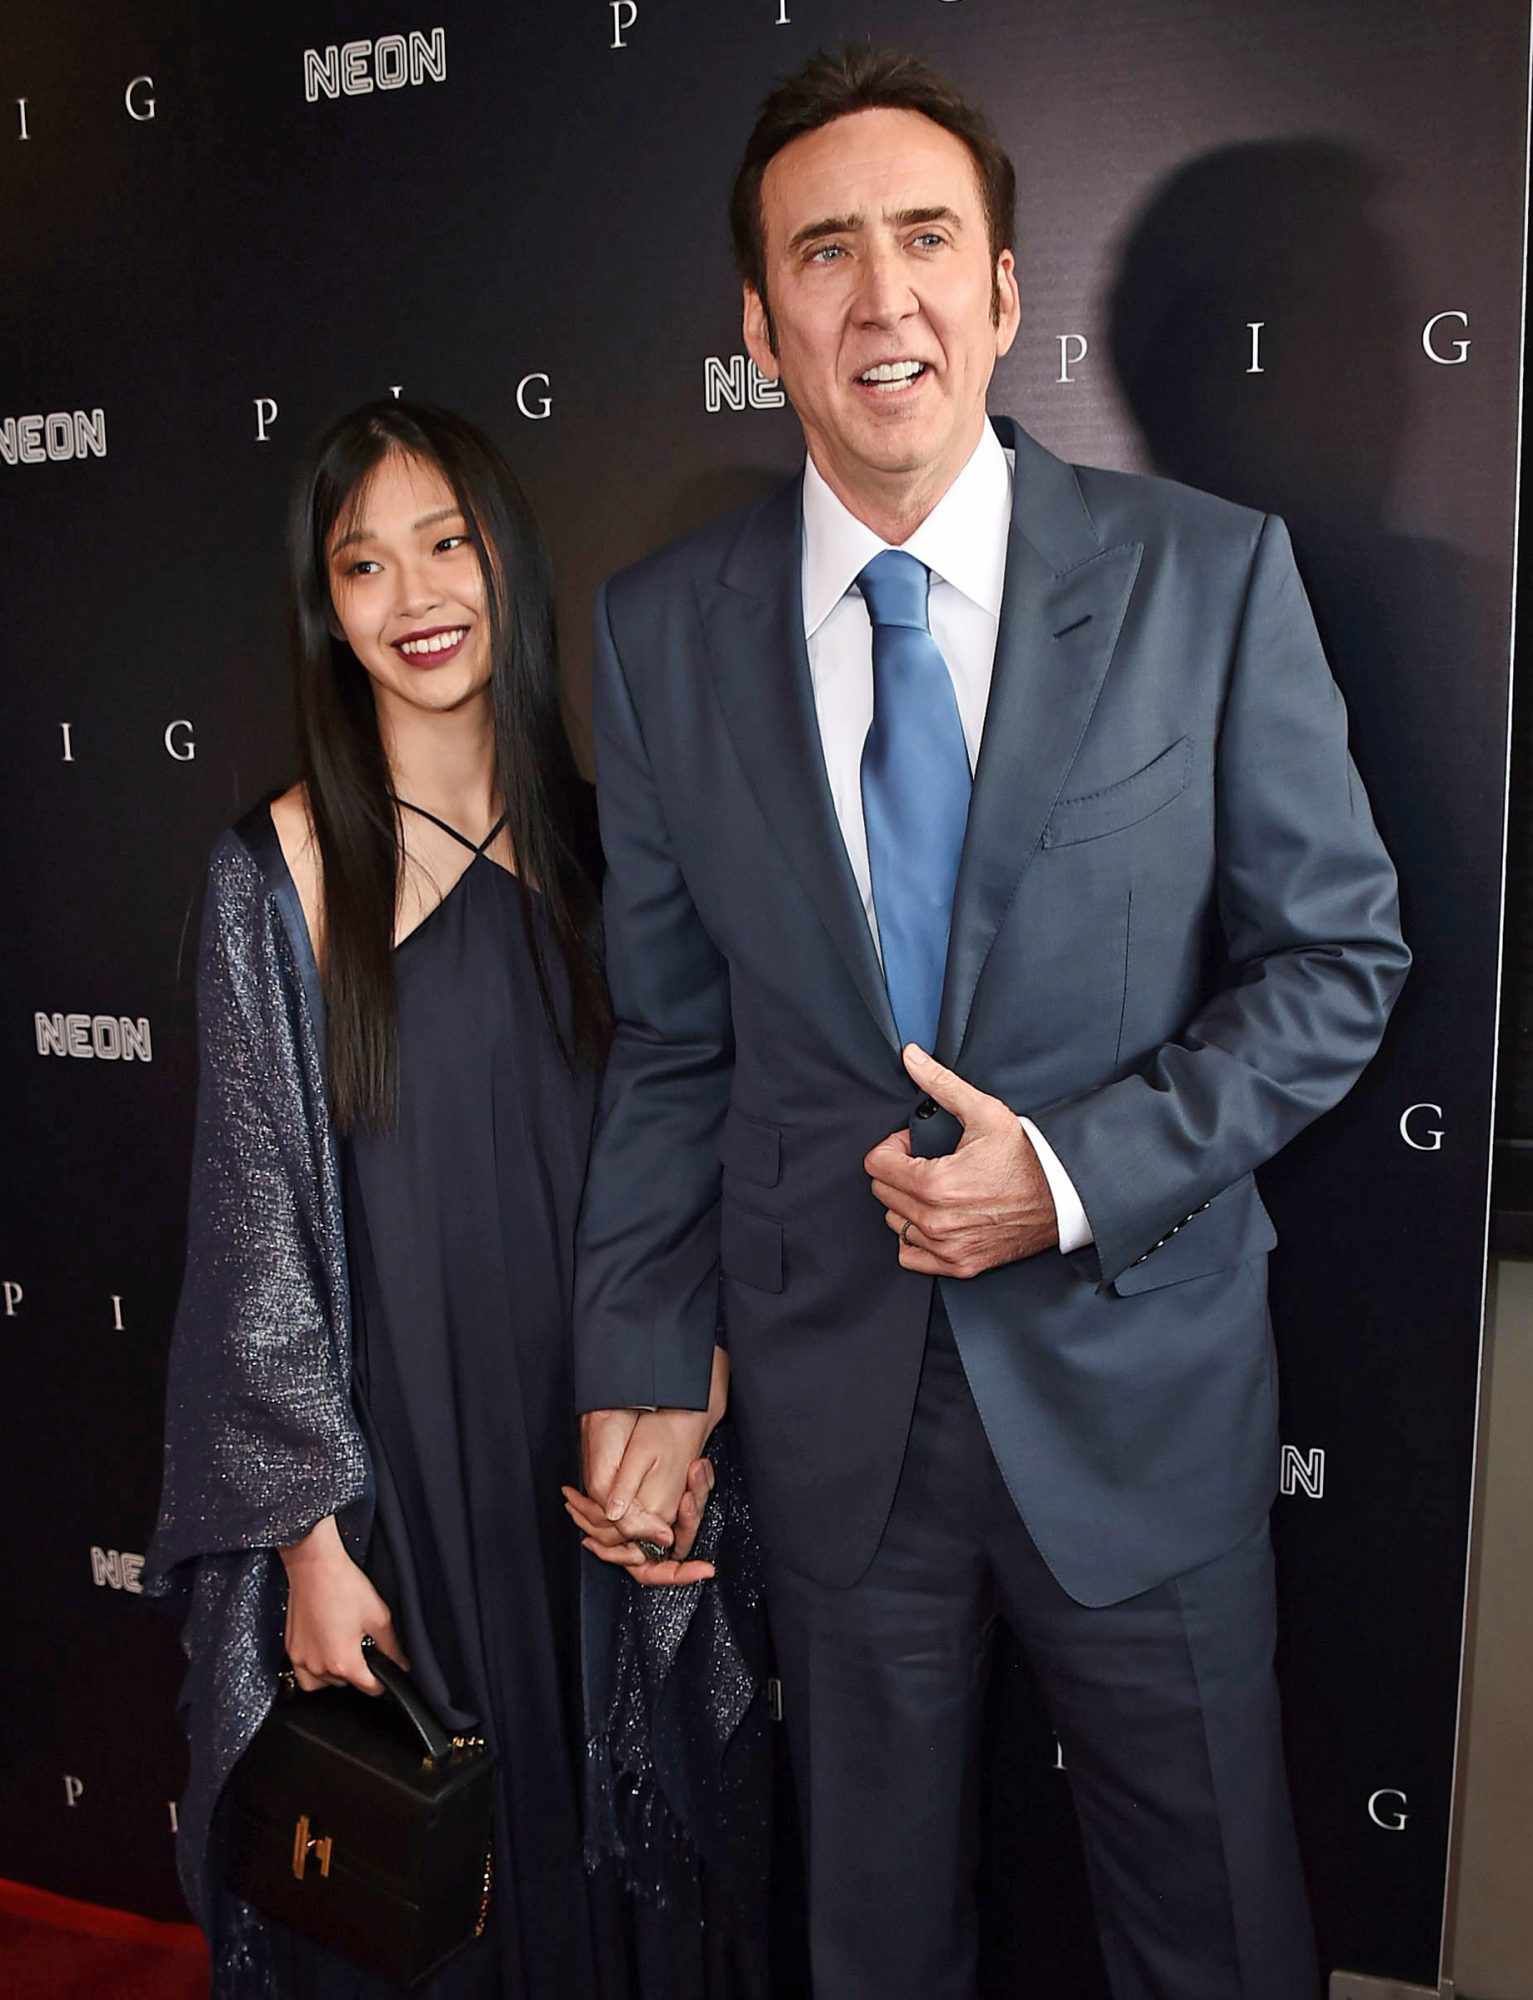 Riko Shibata, left, and Nicolas Cage arrive at the Los Angeles premiere of "Pig", at the Nuart Theatre